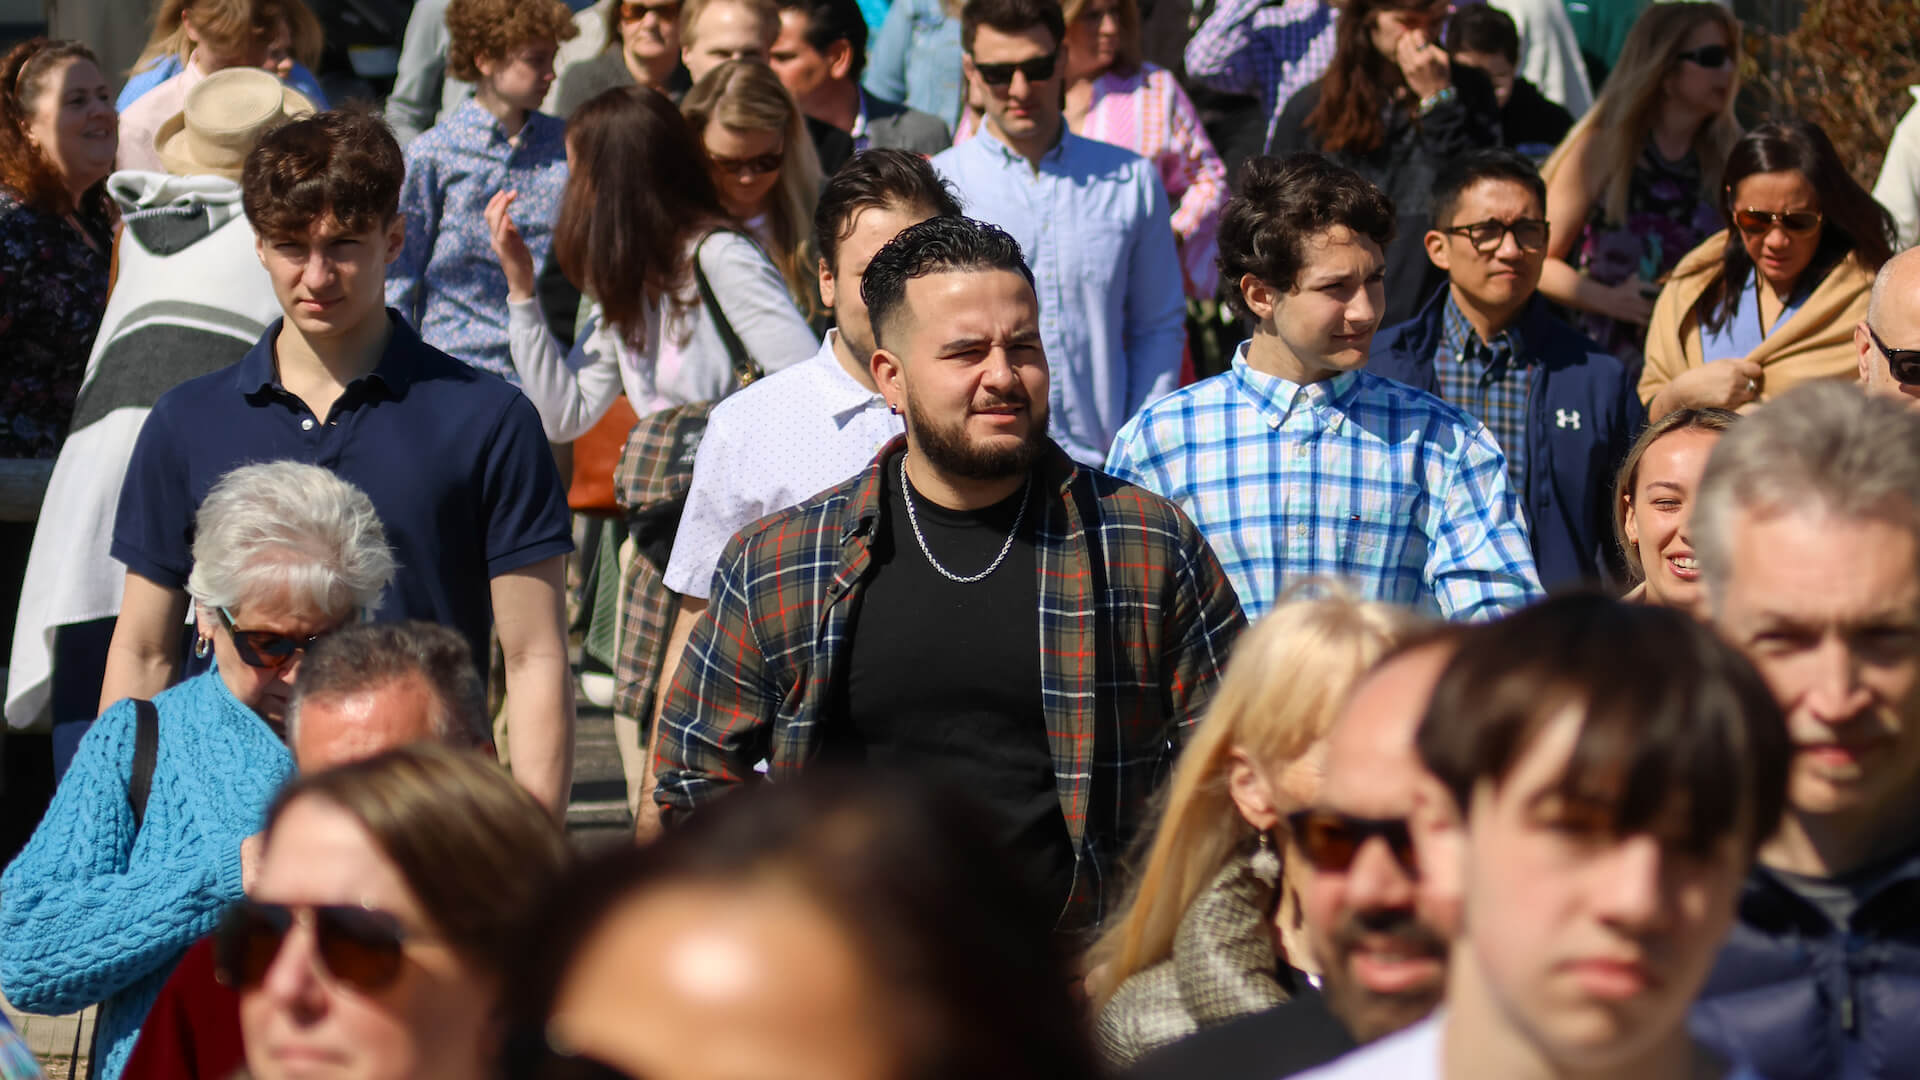 man in plaid shirt among group of people